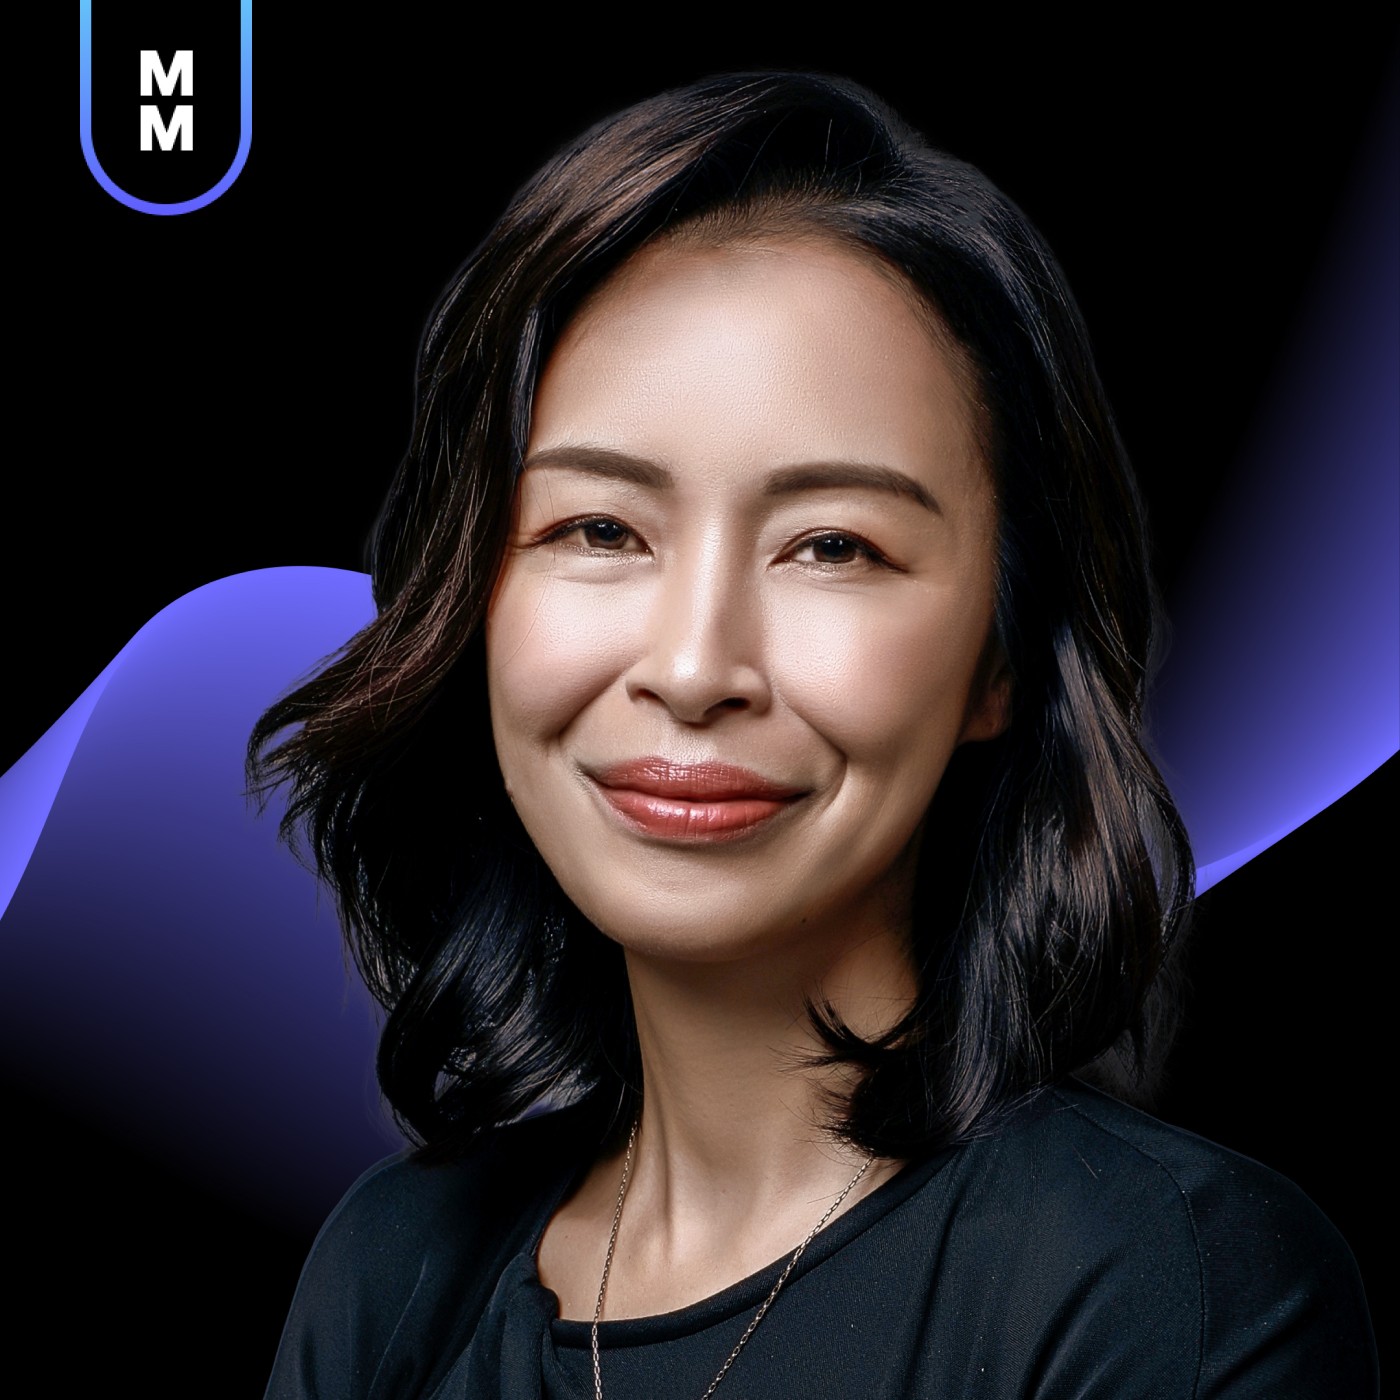 Ep 73 | Crypto’s Future After FTX, with Angie Lau of Forkast.News